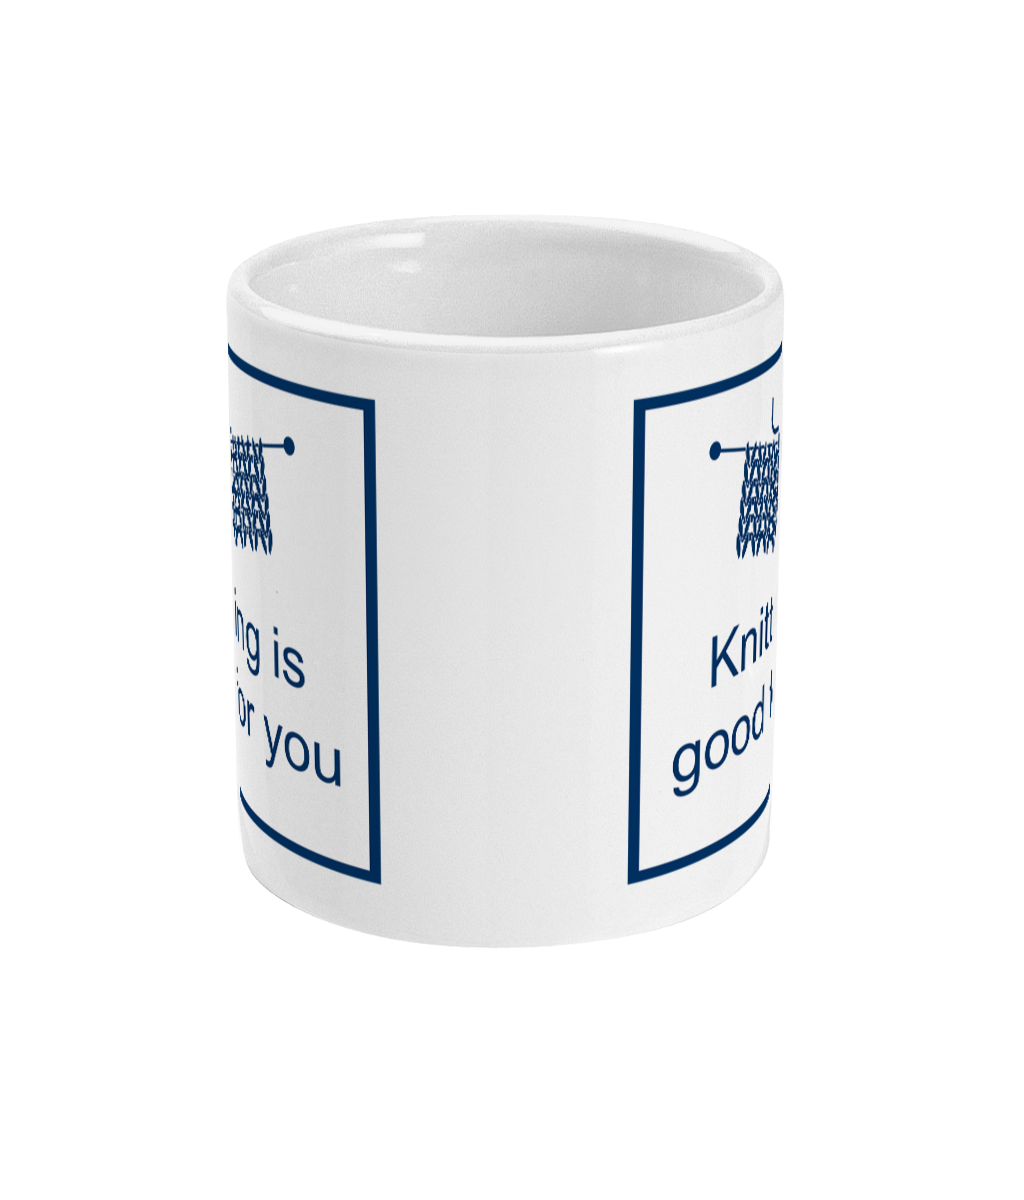 mug with knitting is good for you printed on it together with a piece of knitting